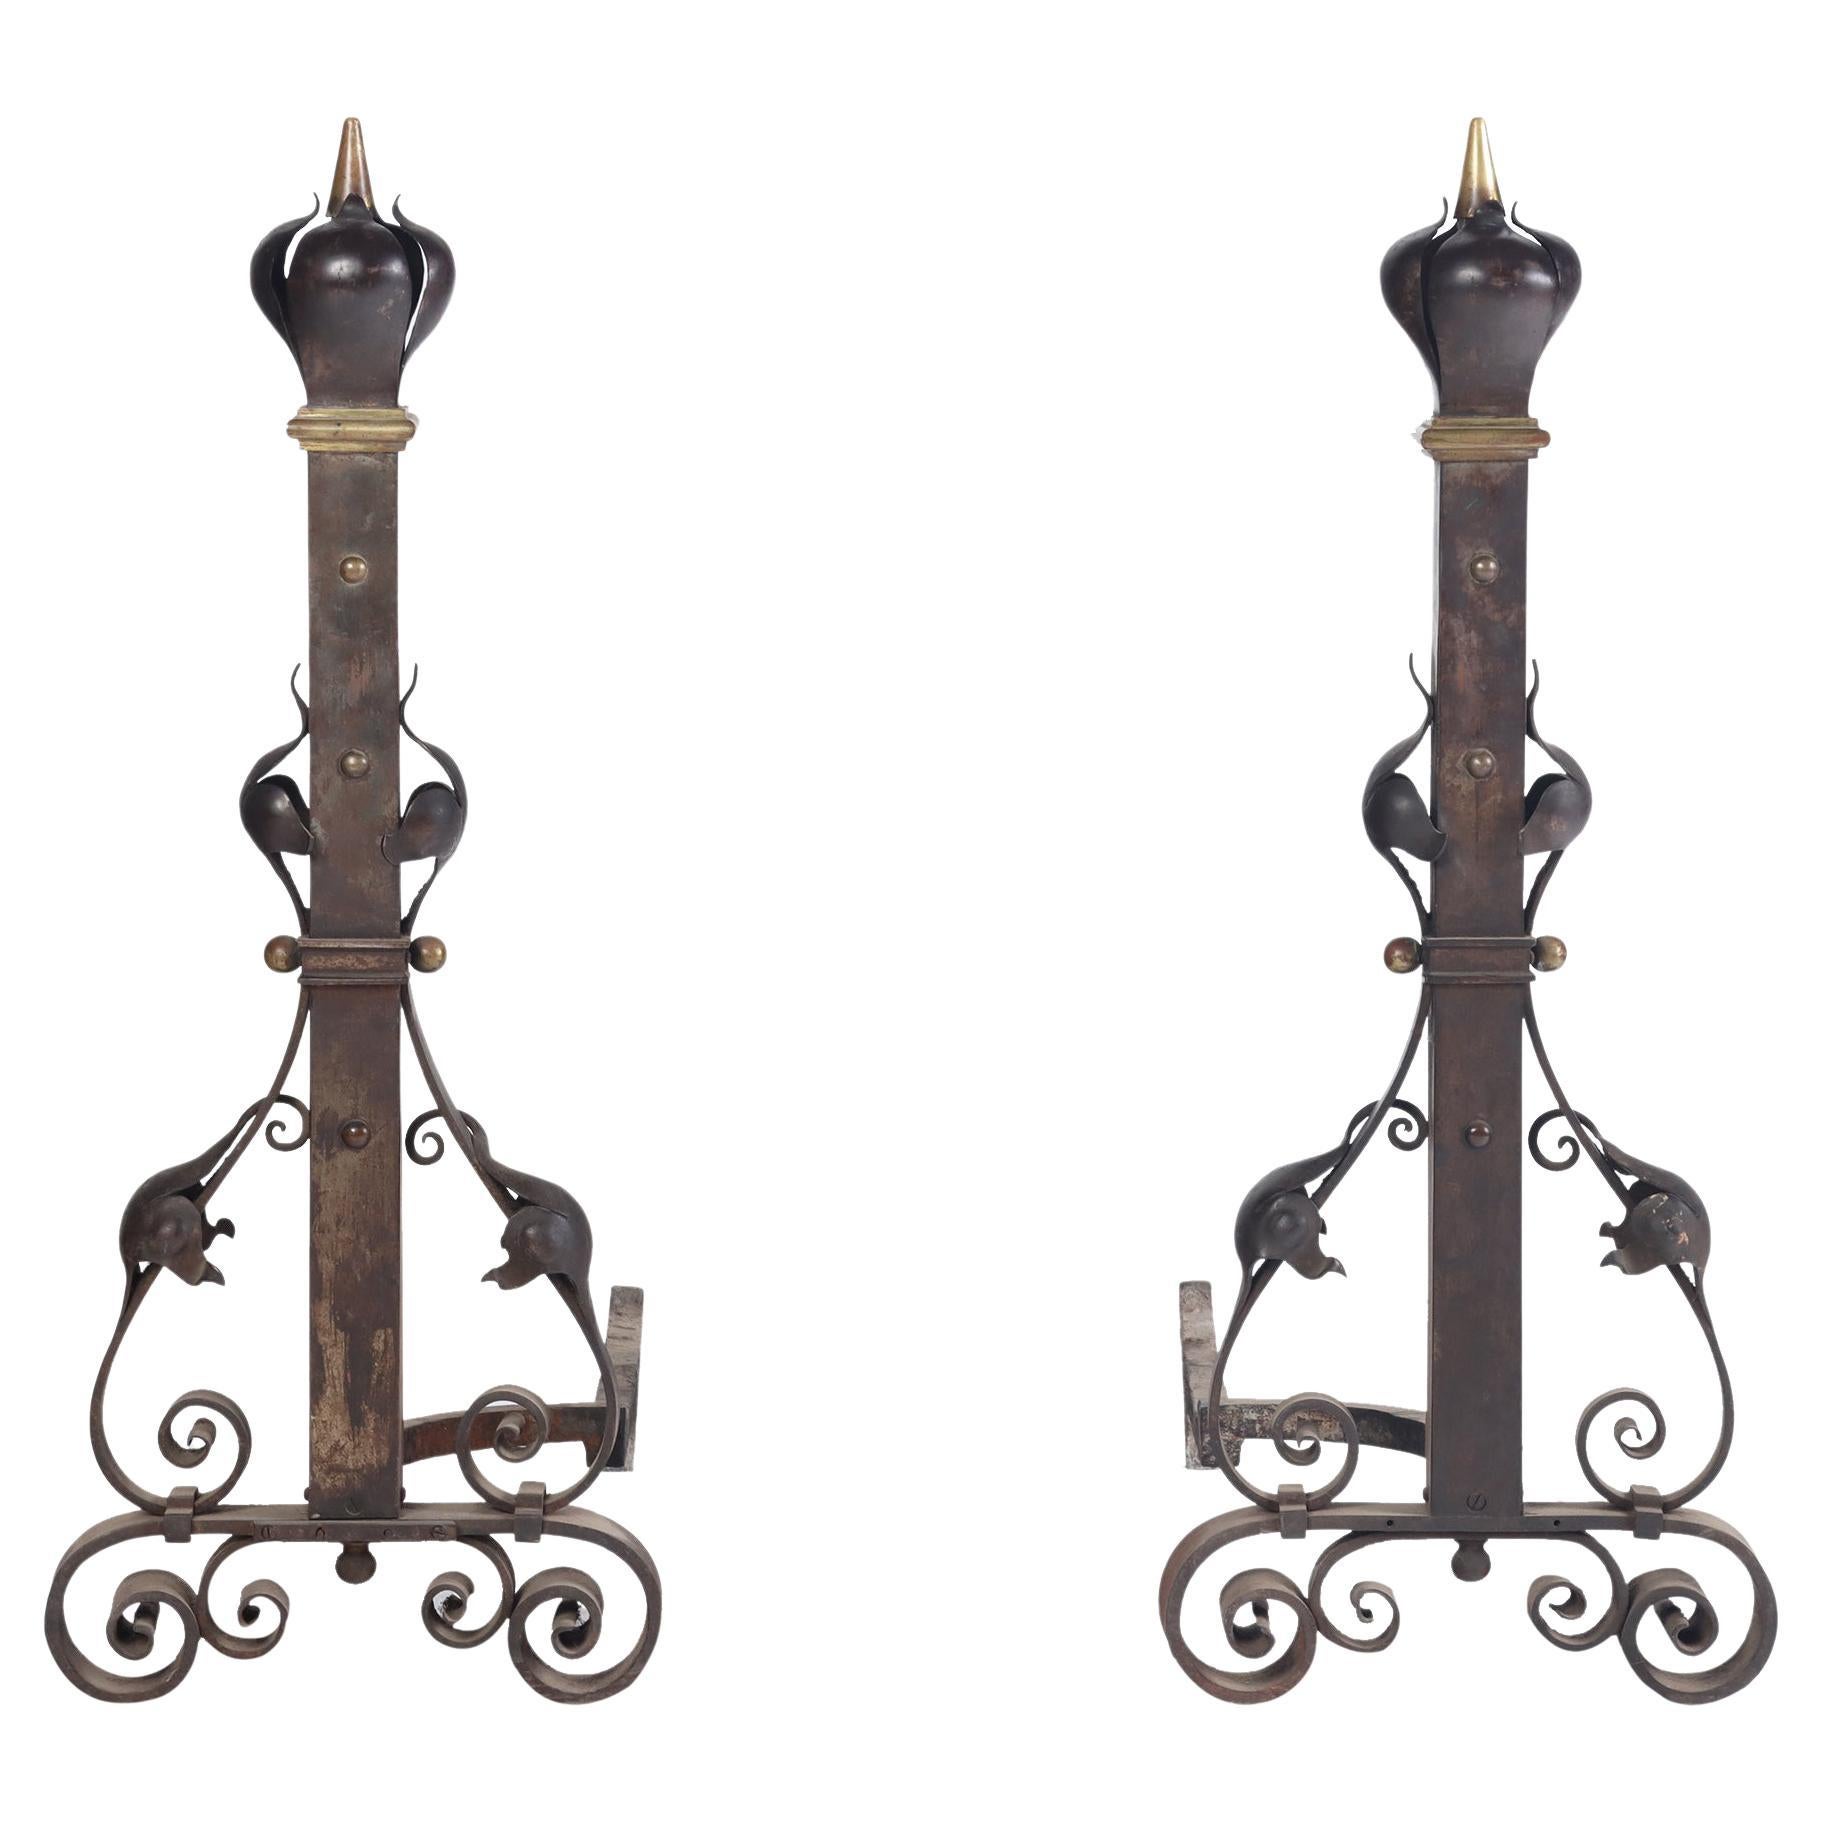 Substantial and Monumental Pair of Nineteenth Century French Wrought Iron and